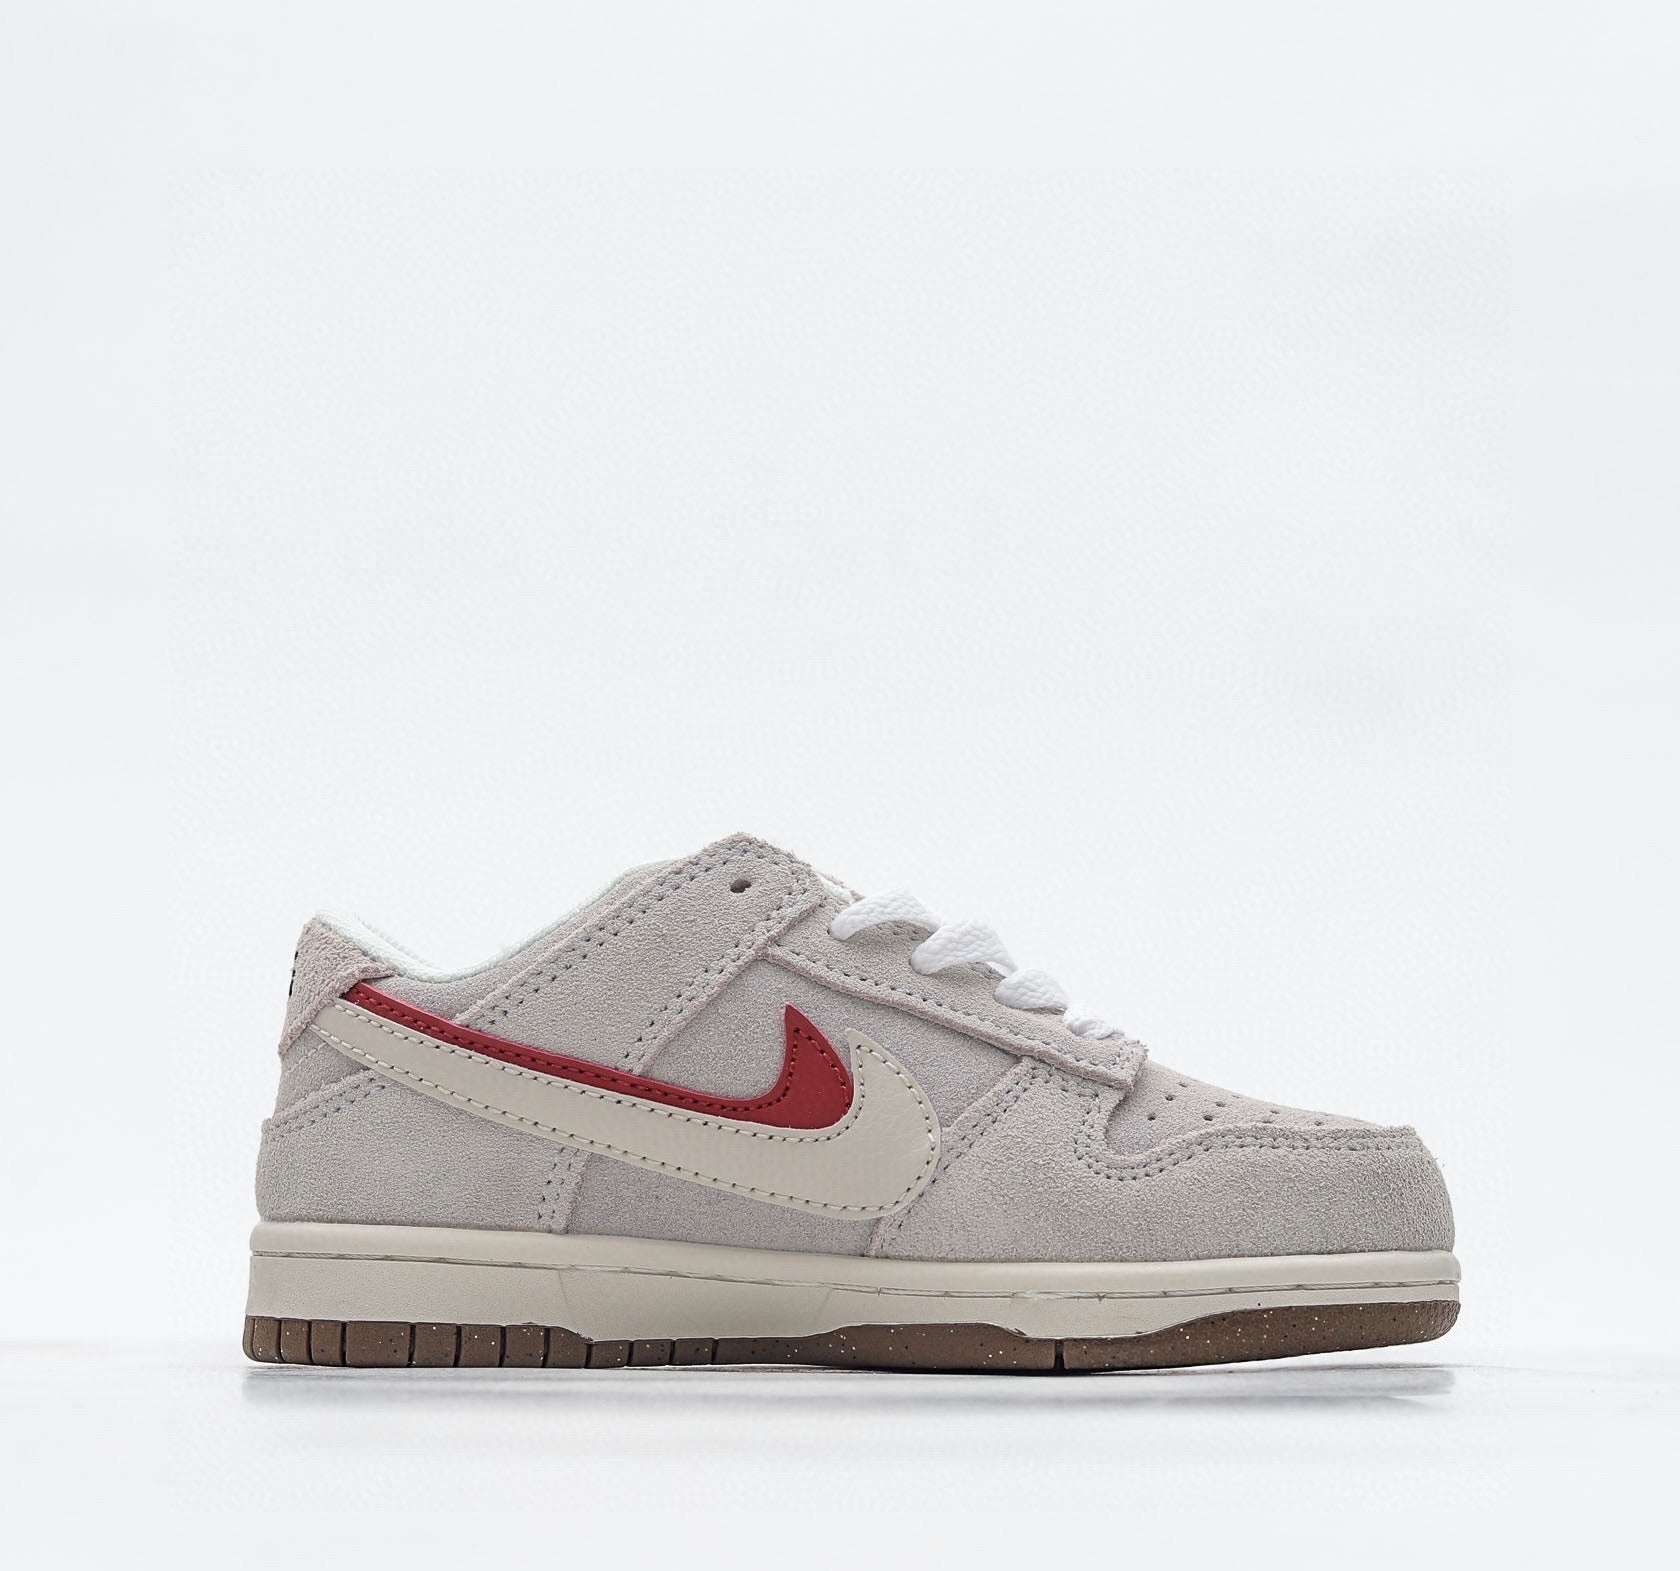 Nike SB grey and red shoes